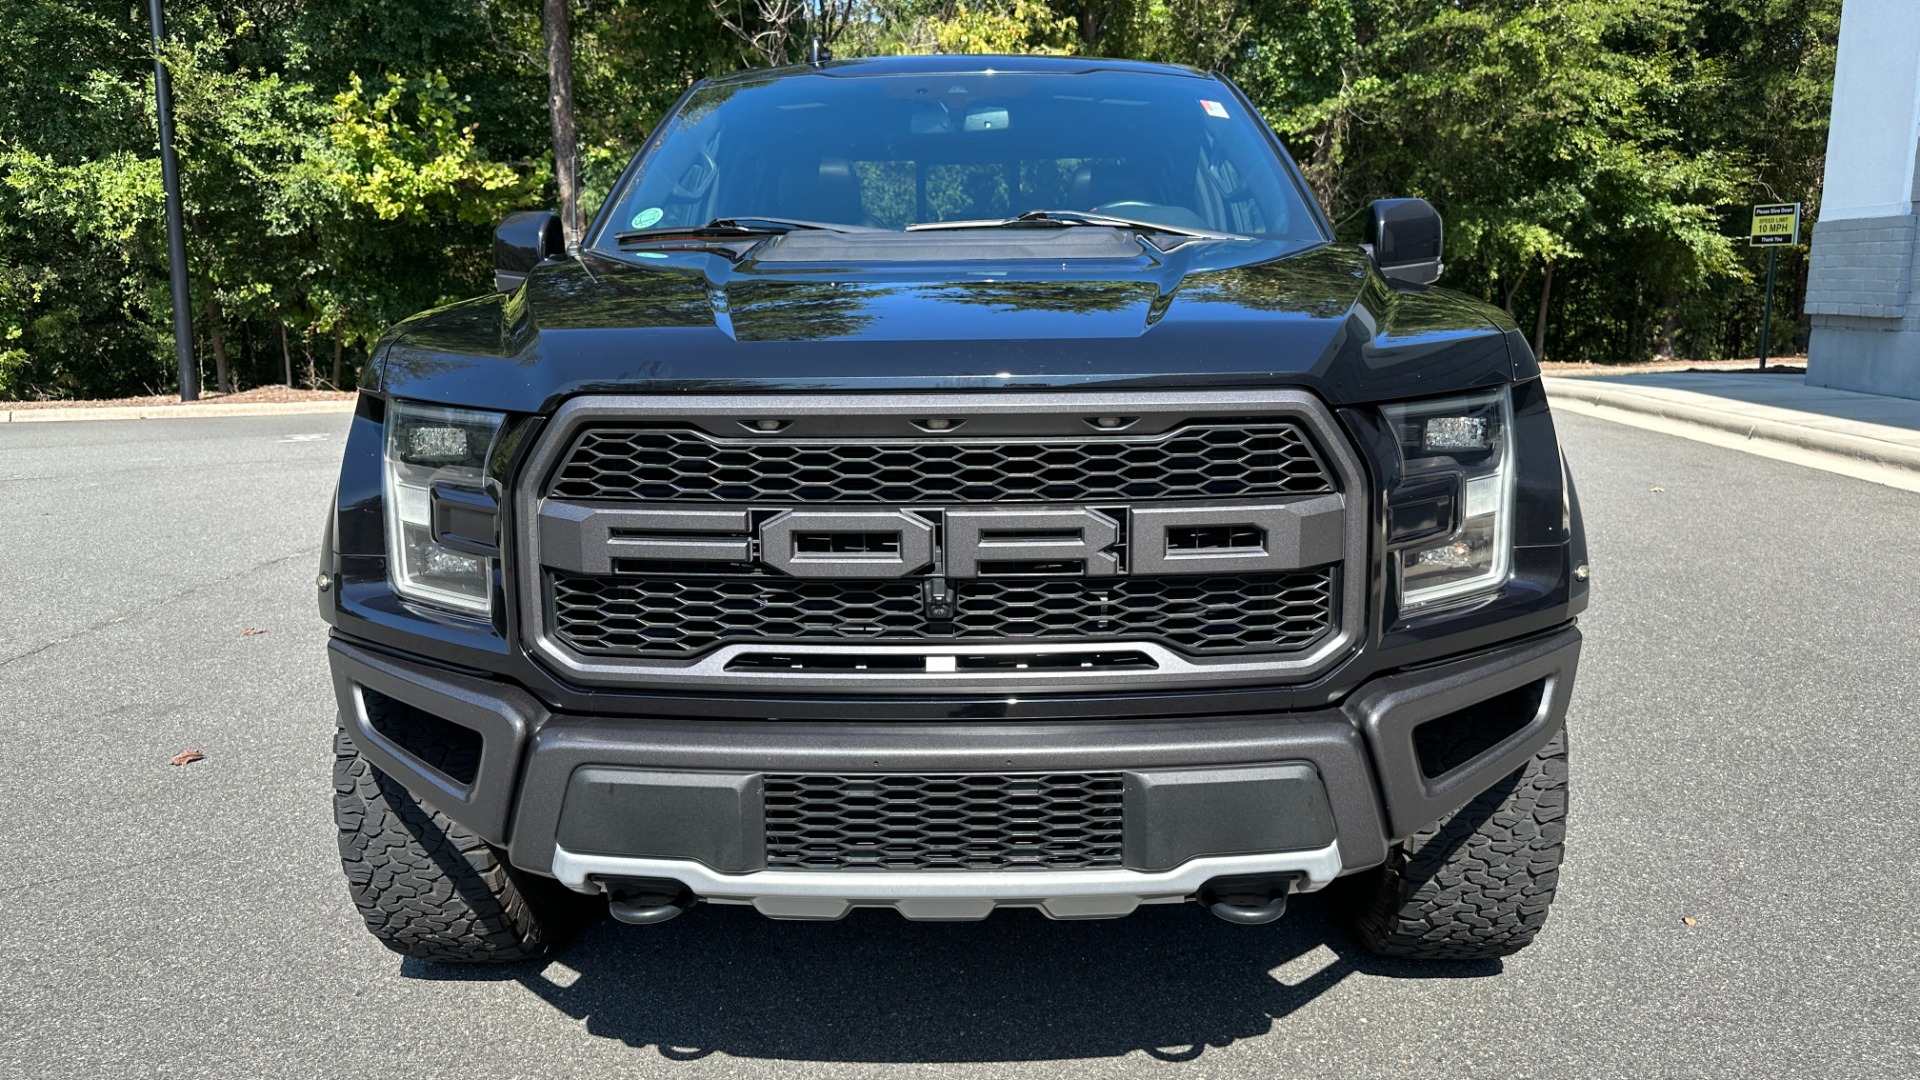 Used 2019 Ford F-150 RAPTOR / CARBON PKG / PANO ROOF / TECH PKG / 17IN FORGED WHEELS for sale $58,900 at Formula Imports in Charlotte NC 28227 8